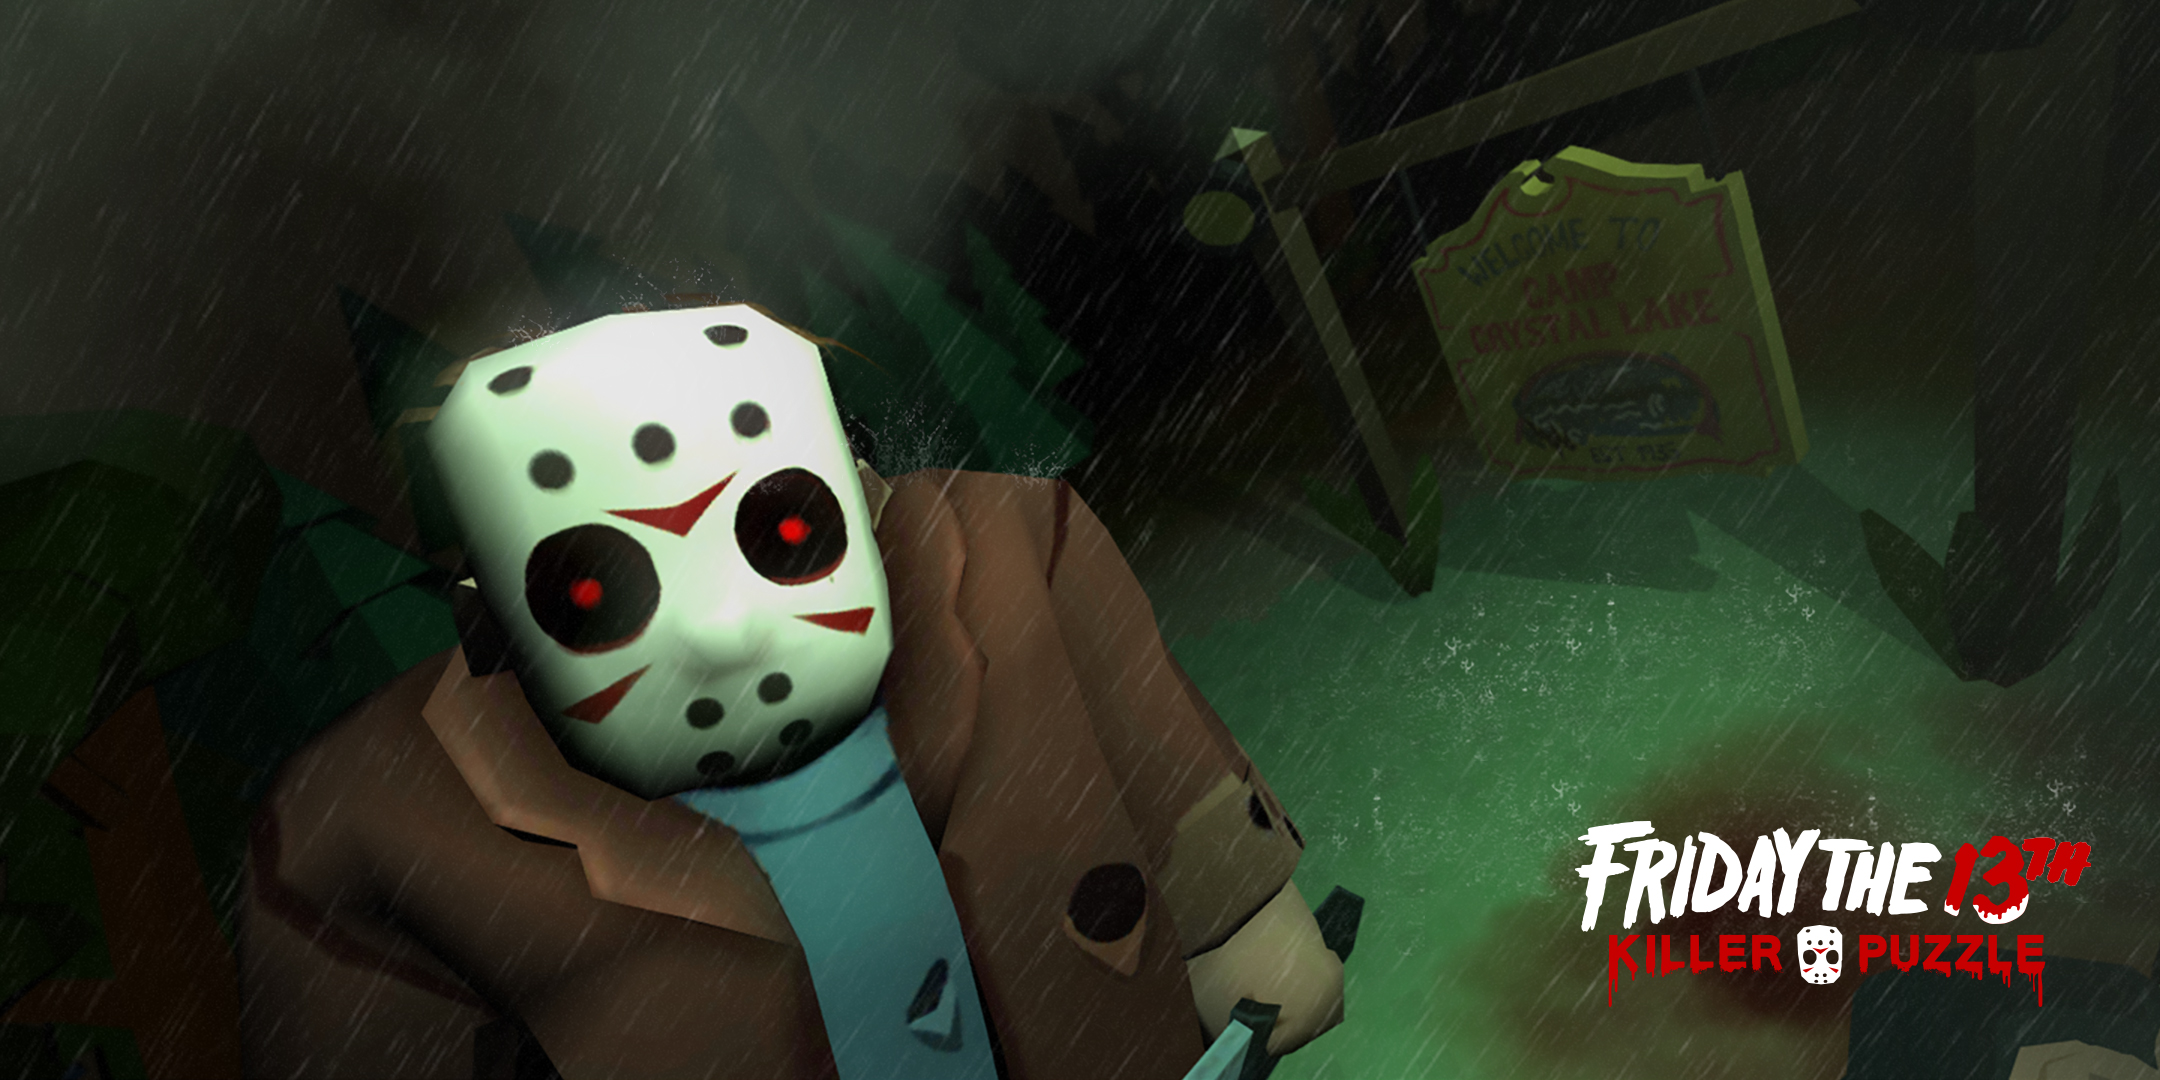 Friday 13 killer puzzle steam фото 16